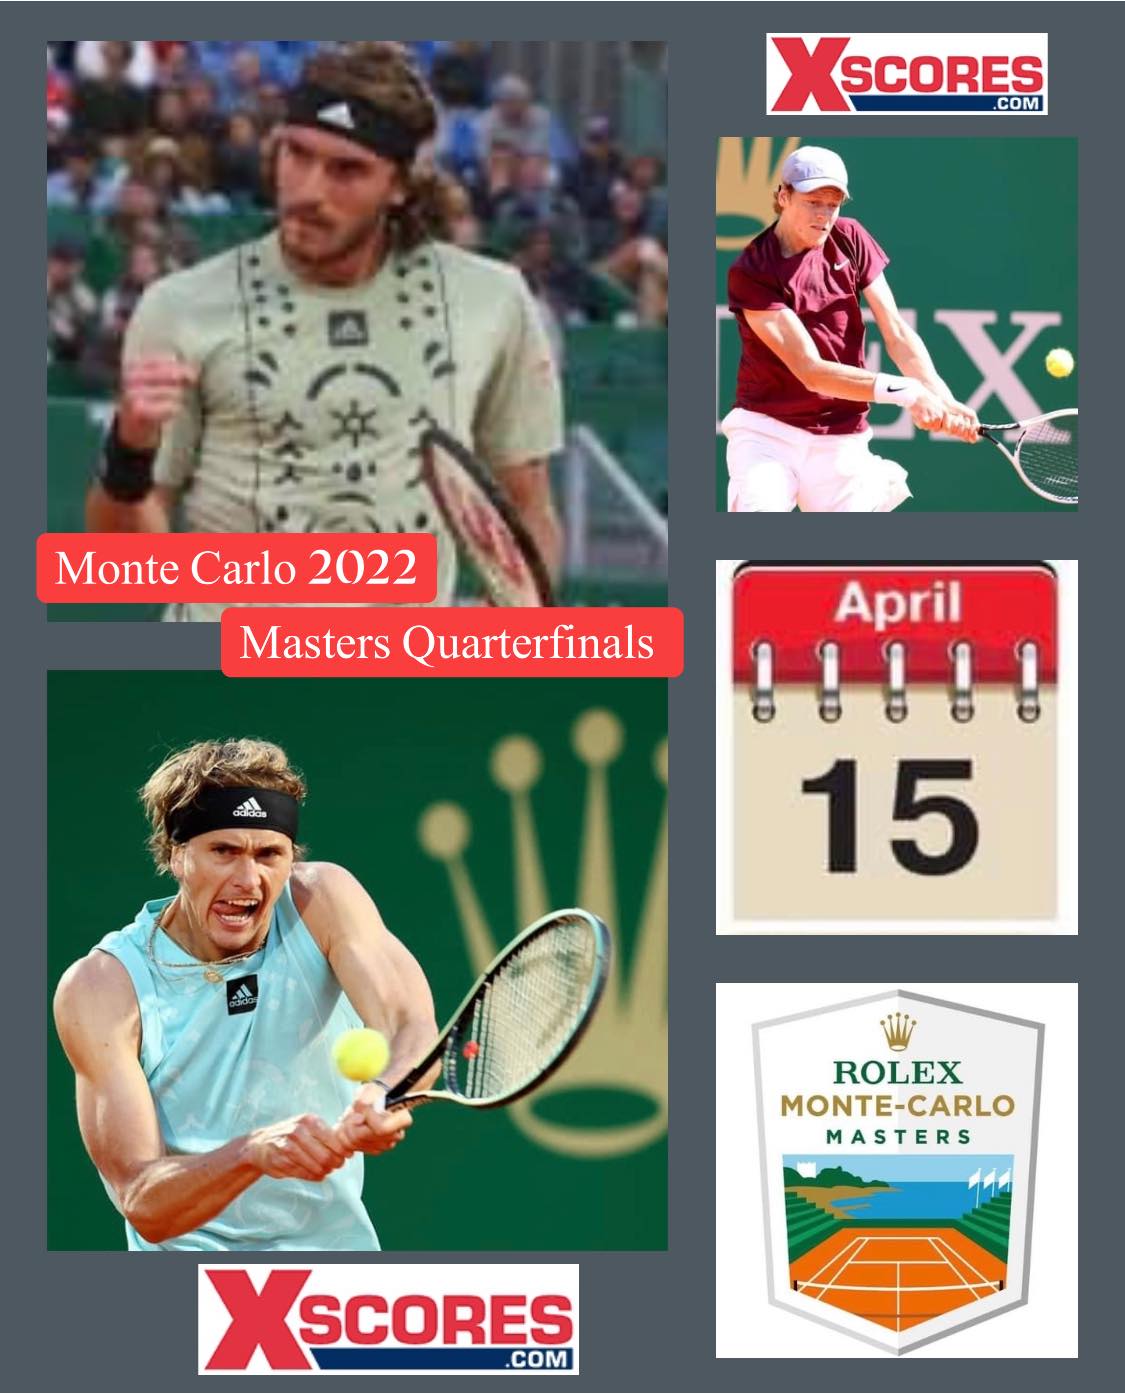 Carlo 2022 monte tennis How to